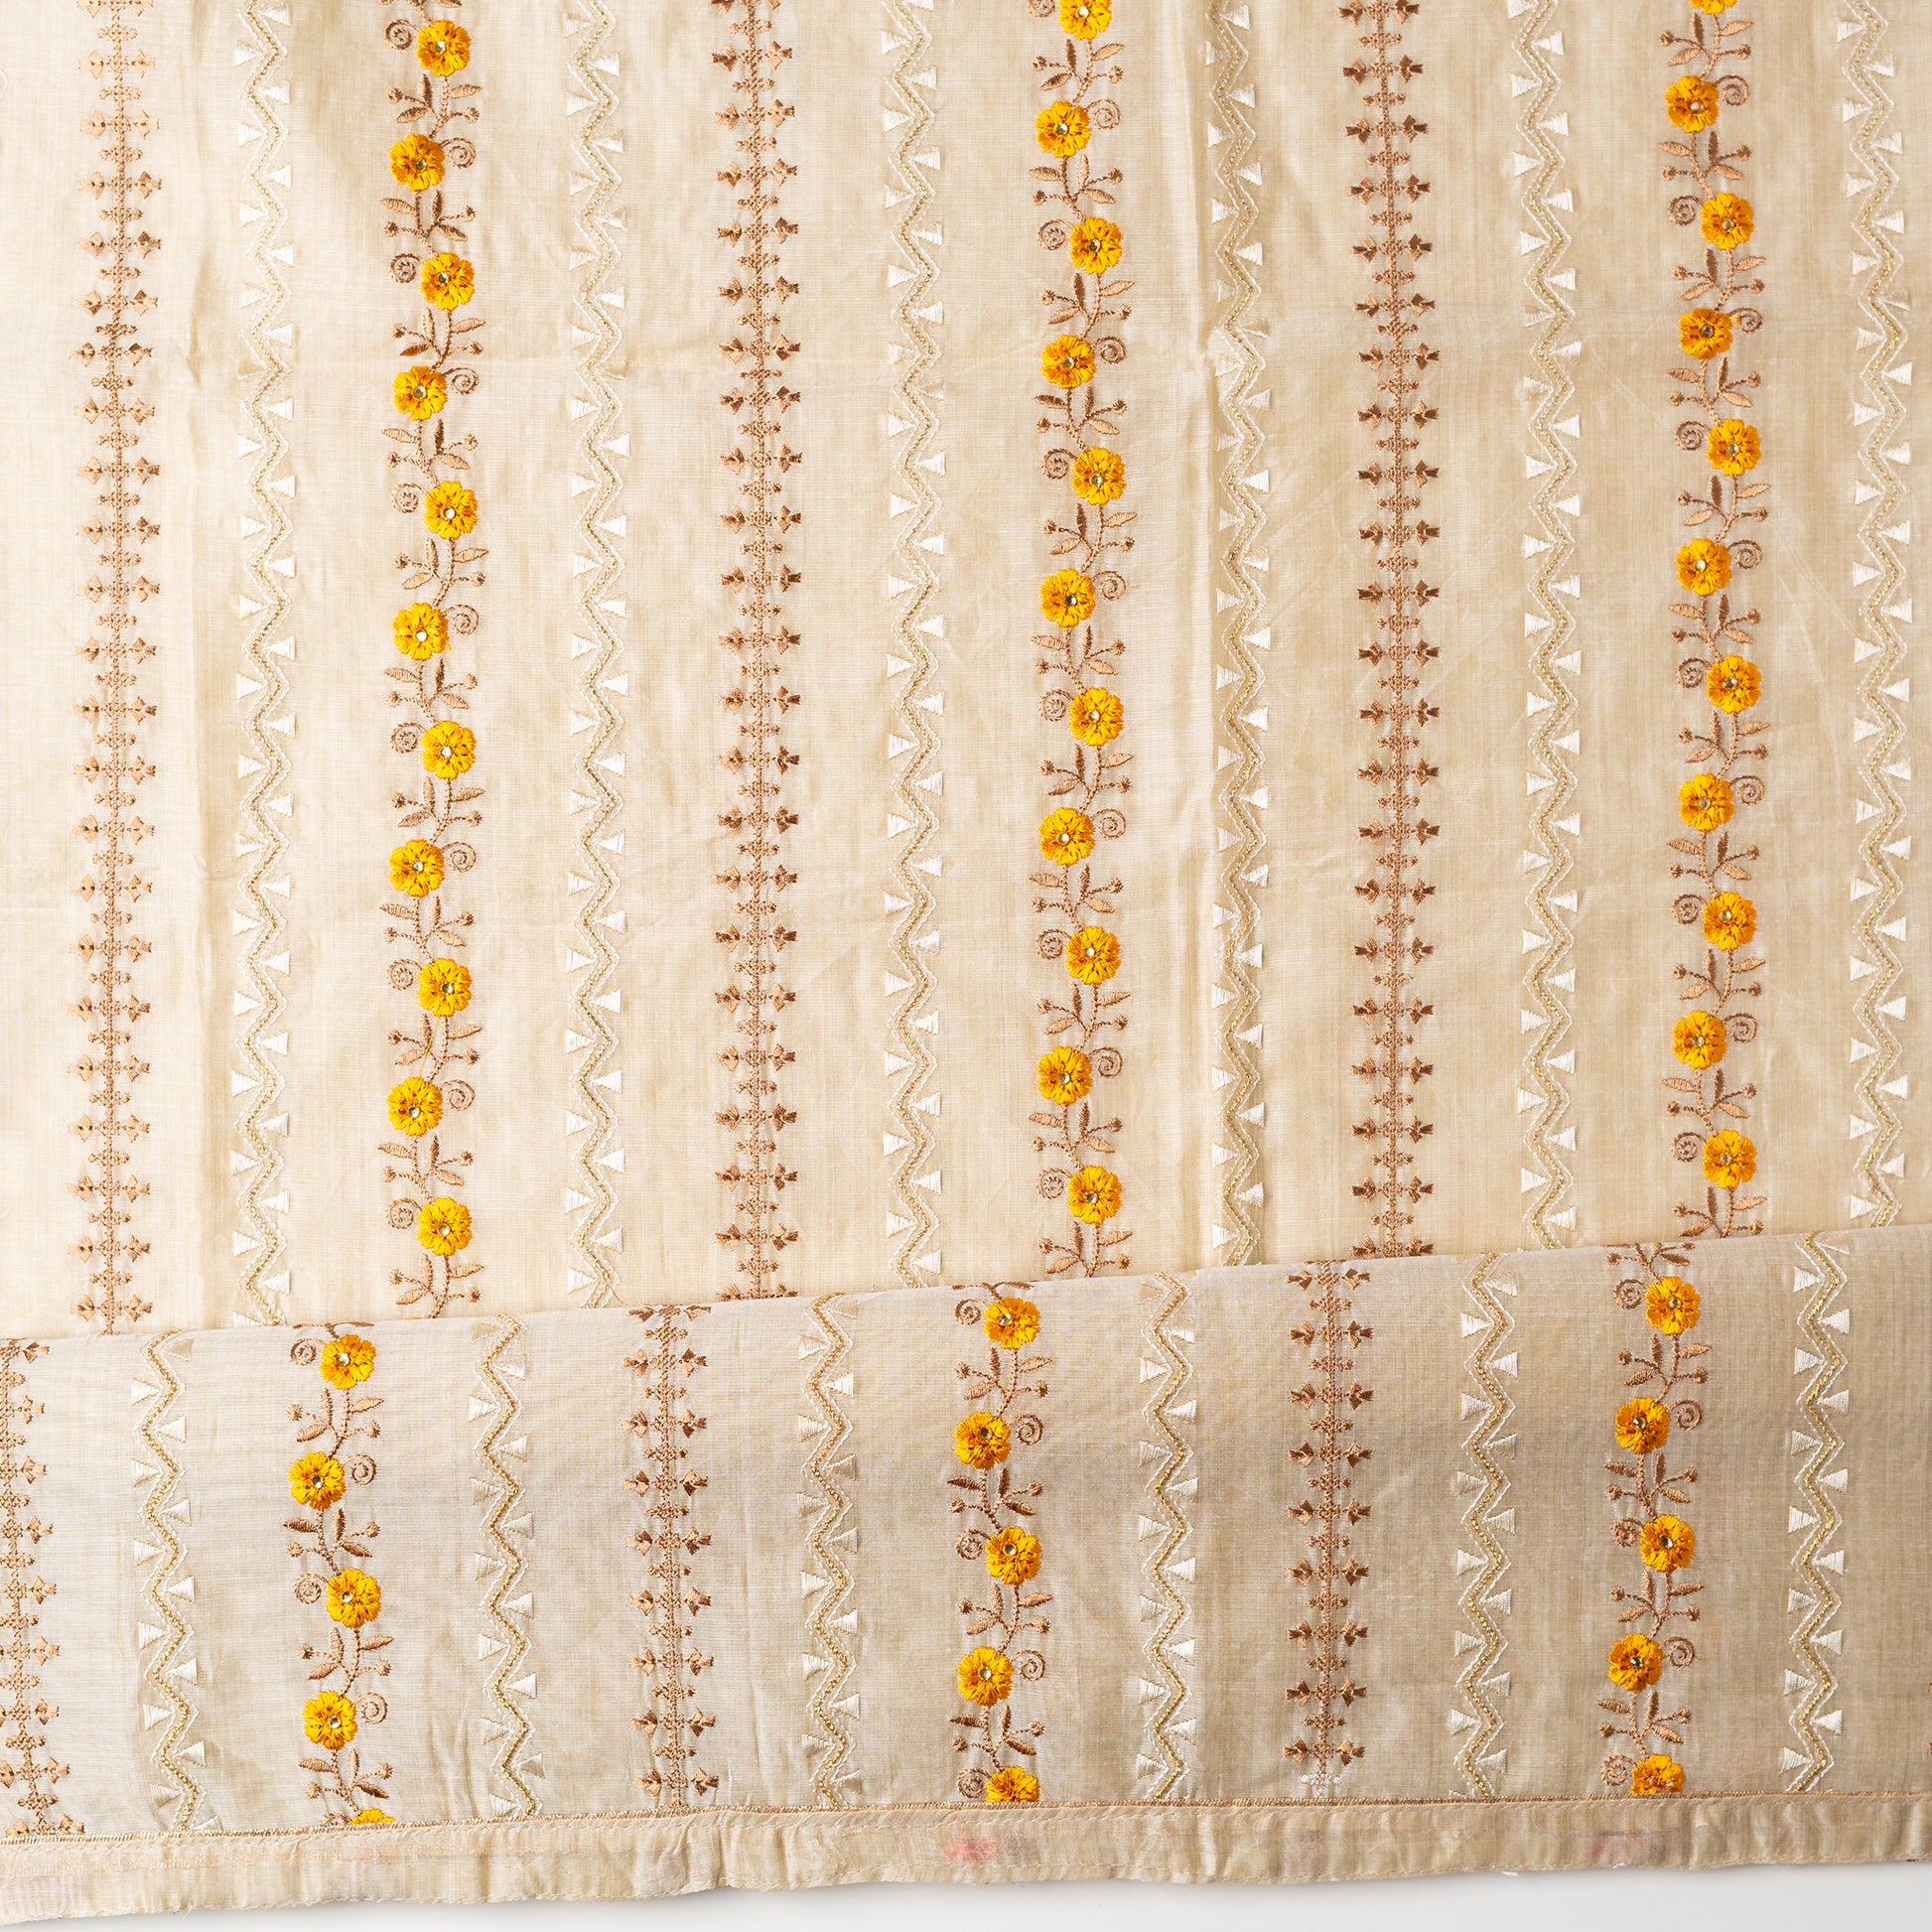 Chanderi silk top with embroidery work and zari thread work, beautiful mustard color flowers in embroidery all over the top